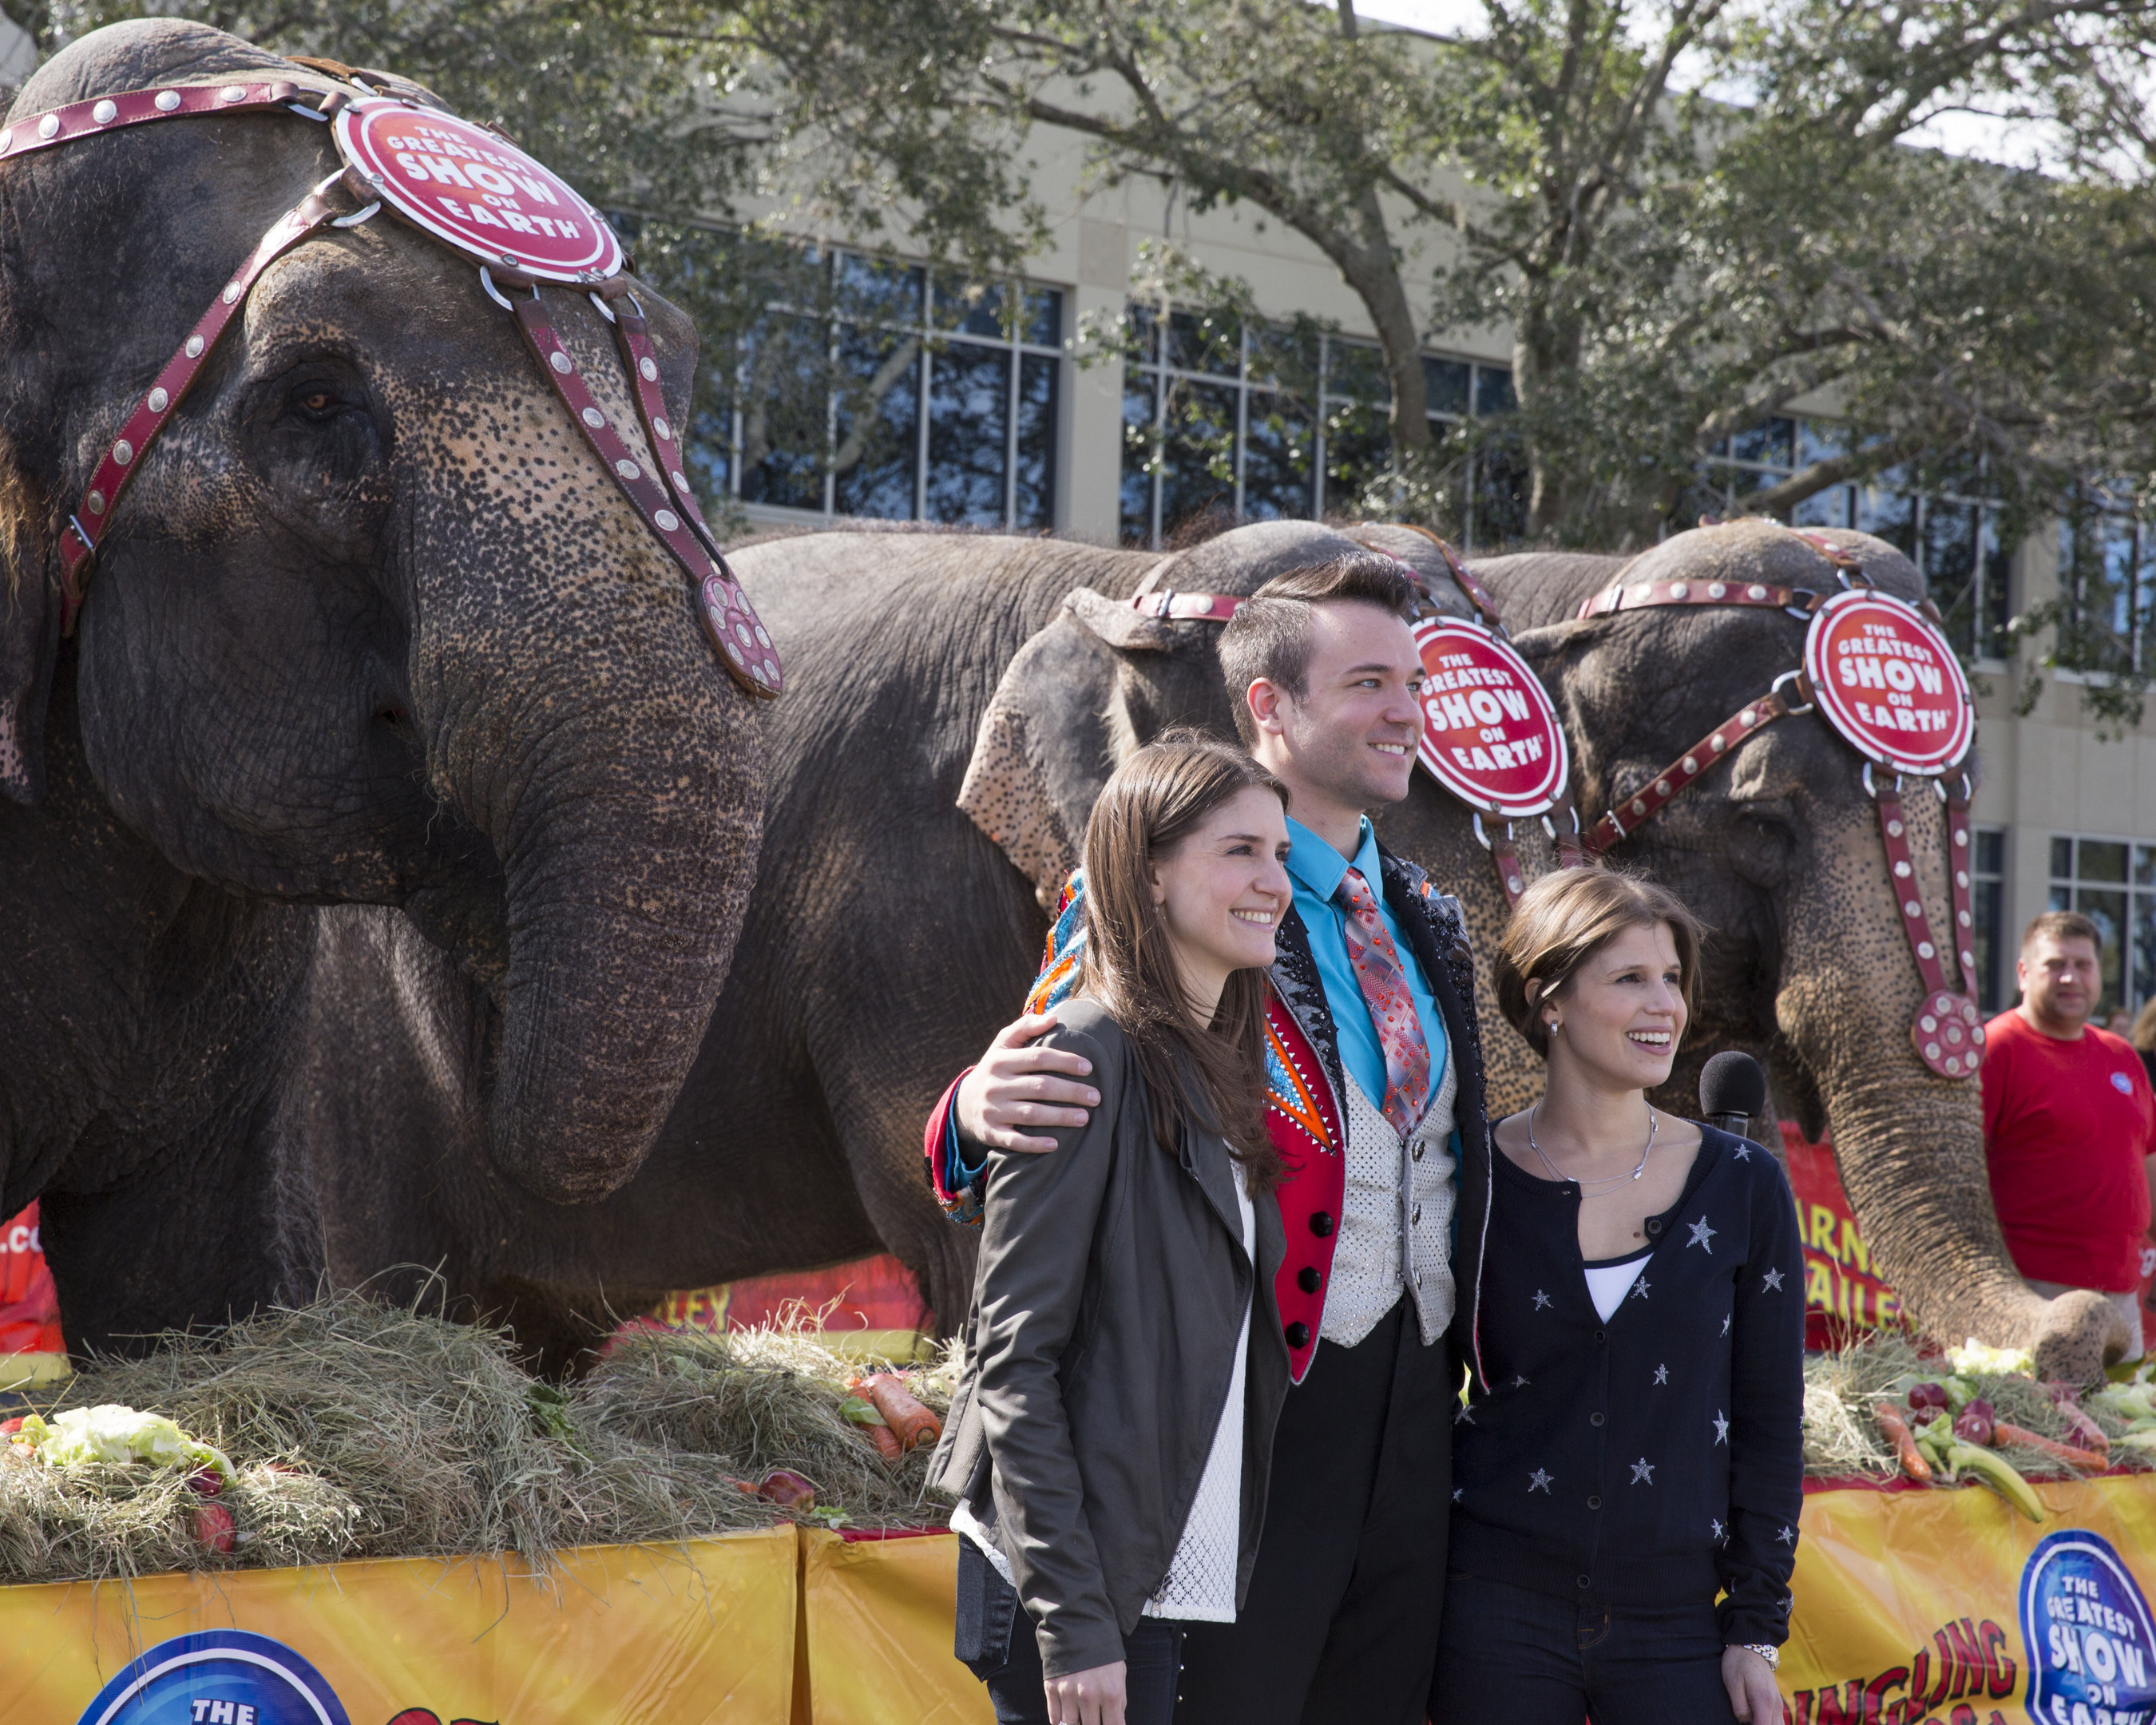 Producers of Ringling Bros. and Barnum & Bailey Nicole Feld and Alana Feld with Ringmaster David Shipman welcoming The Greatest Show On Earth to its permanent winter home at Feld Entertainment Studios in Palmetto, FL.